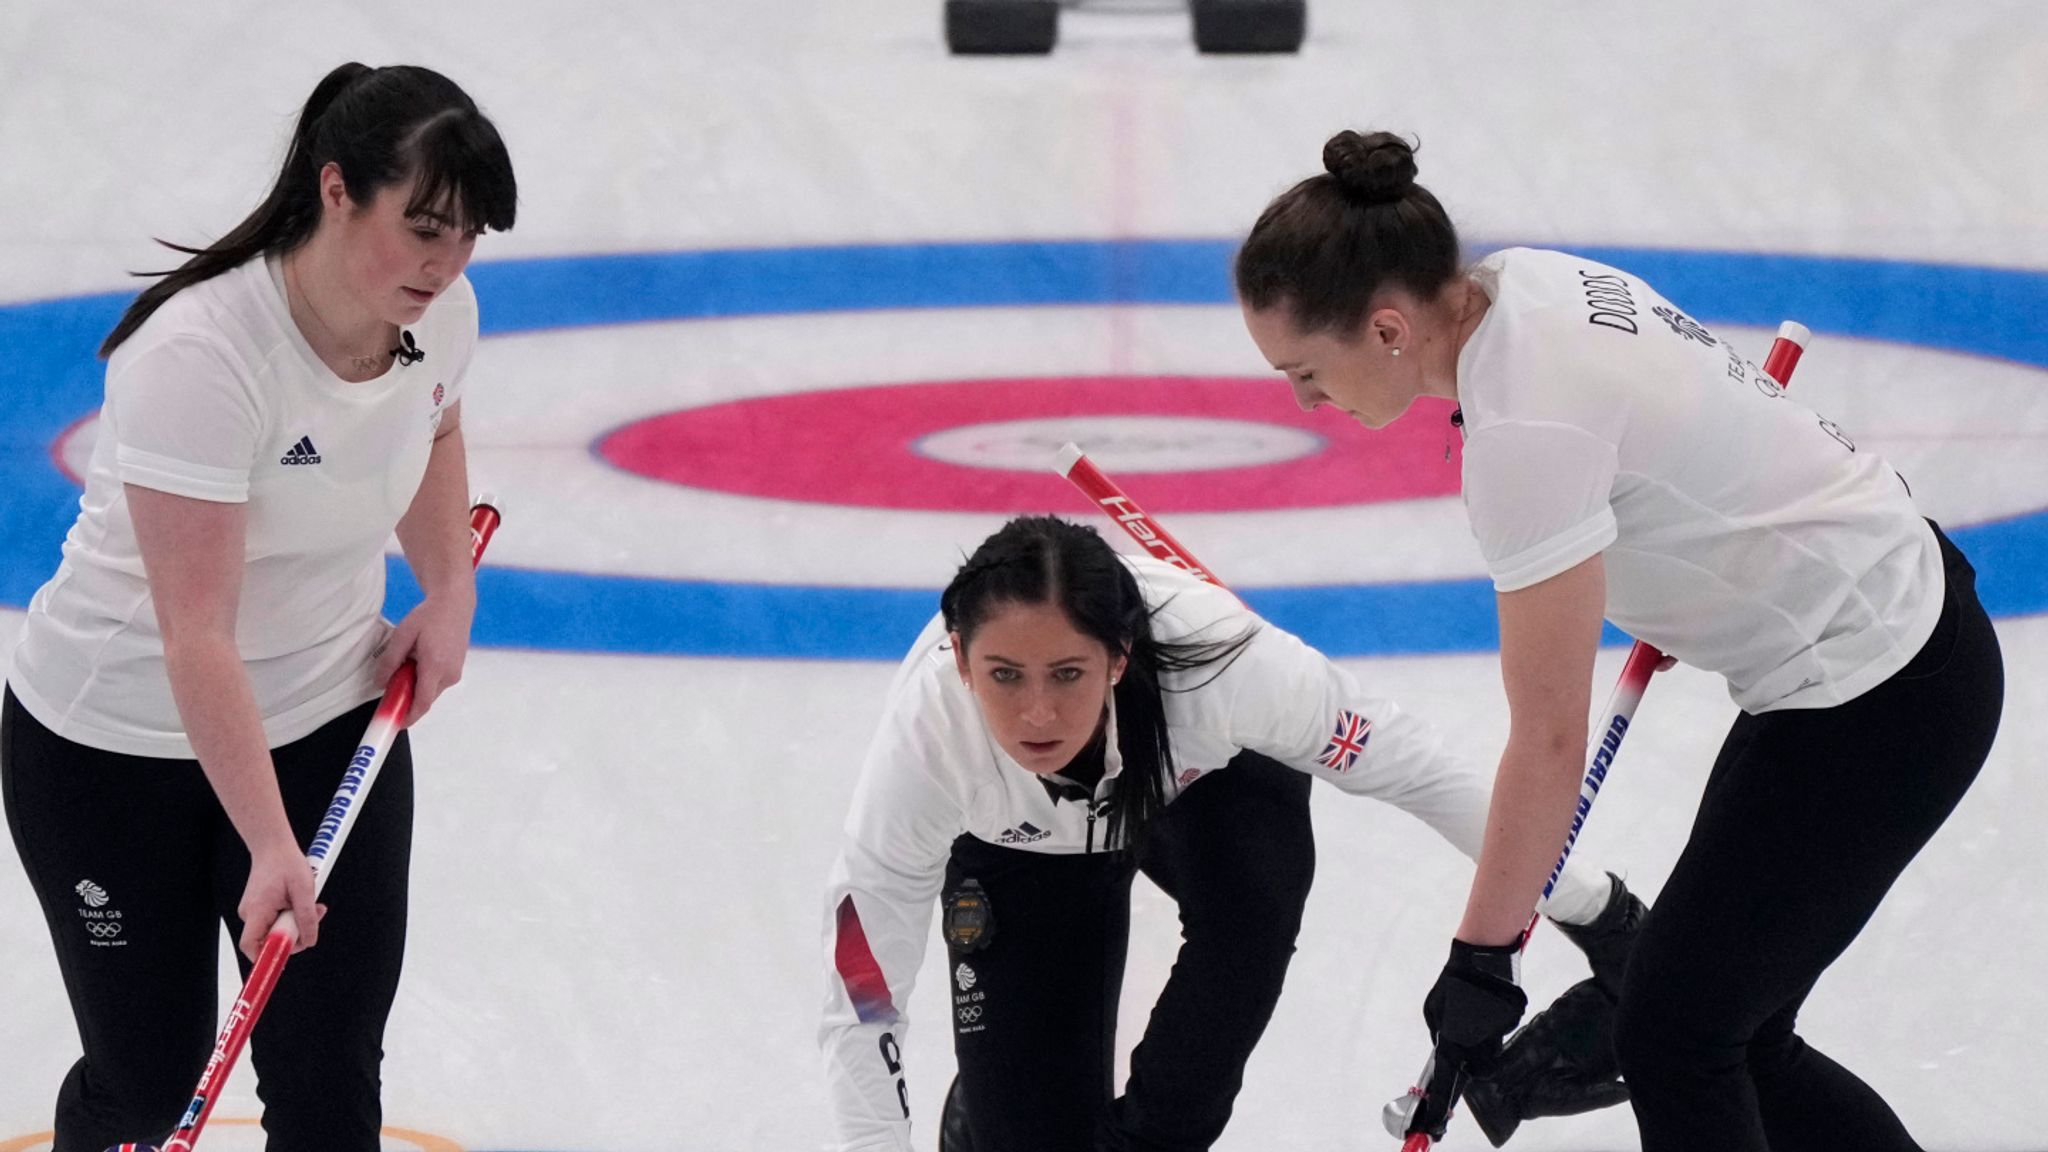 British curling team is mindful to win medals